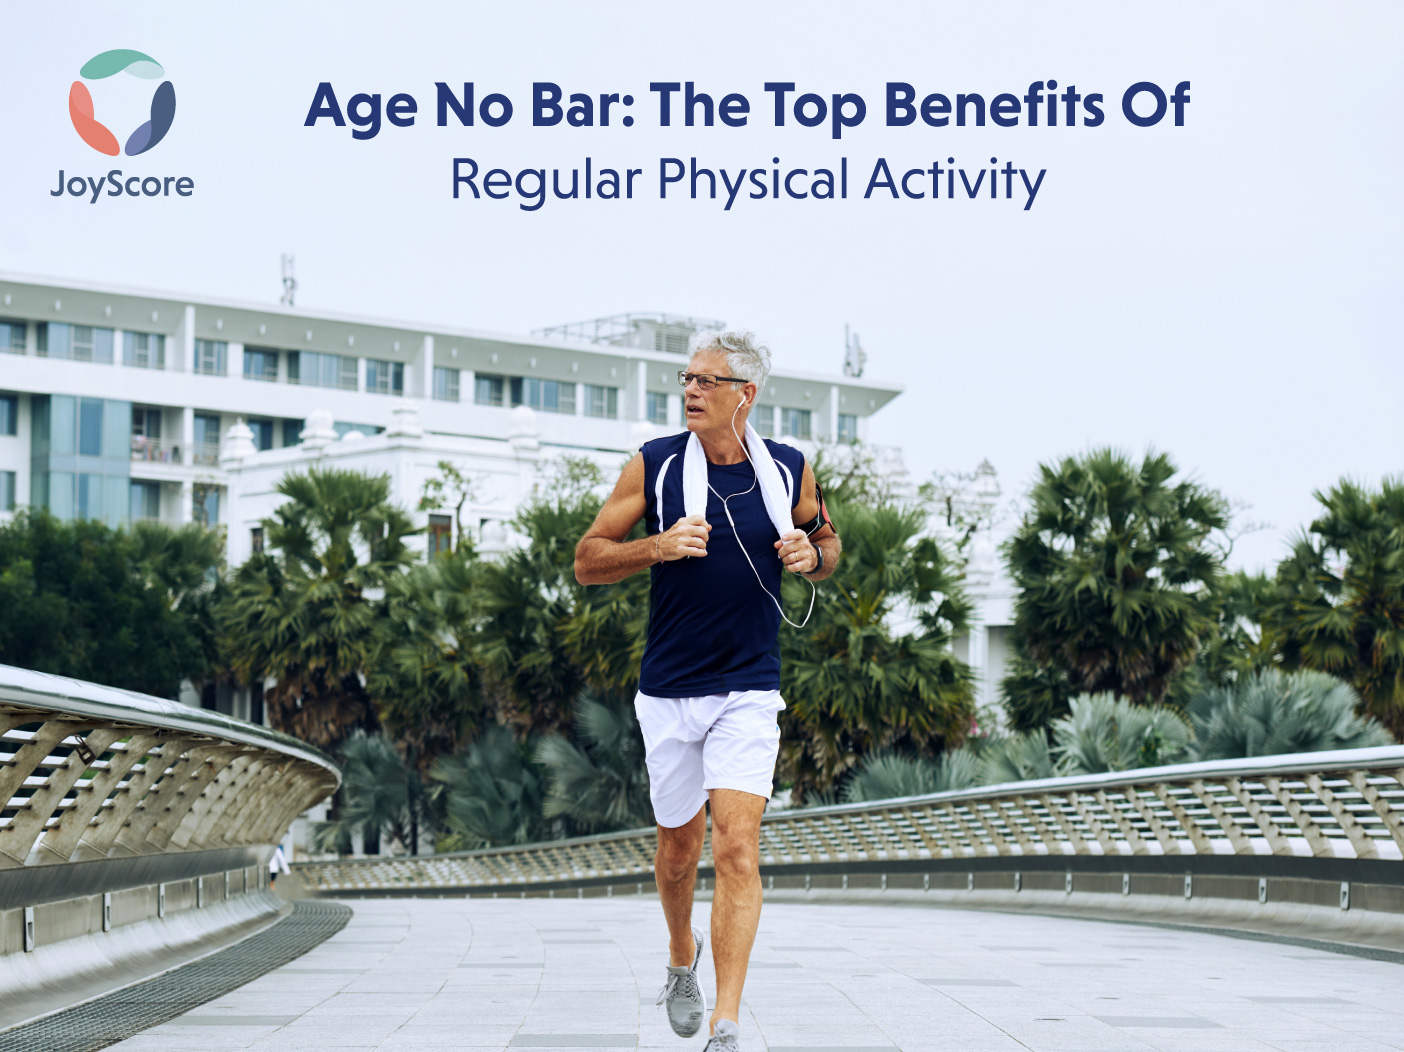 Age No Bar: The Top Benefits Of Regular Physical Activity